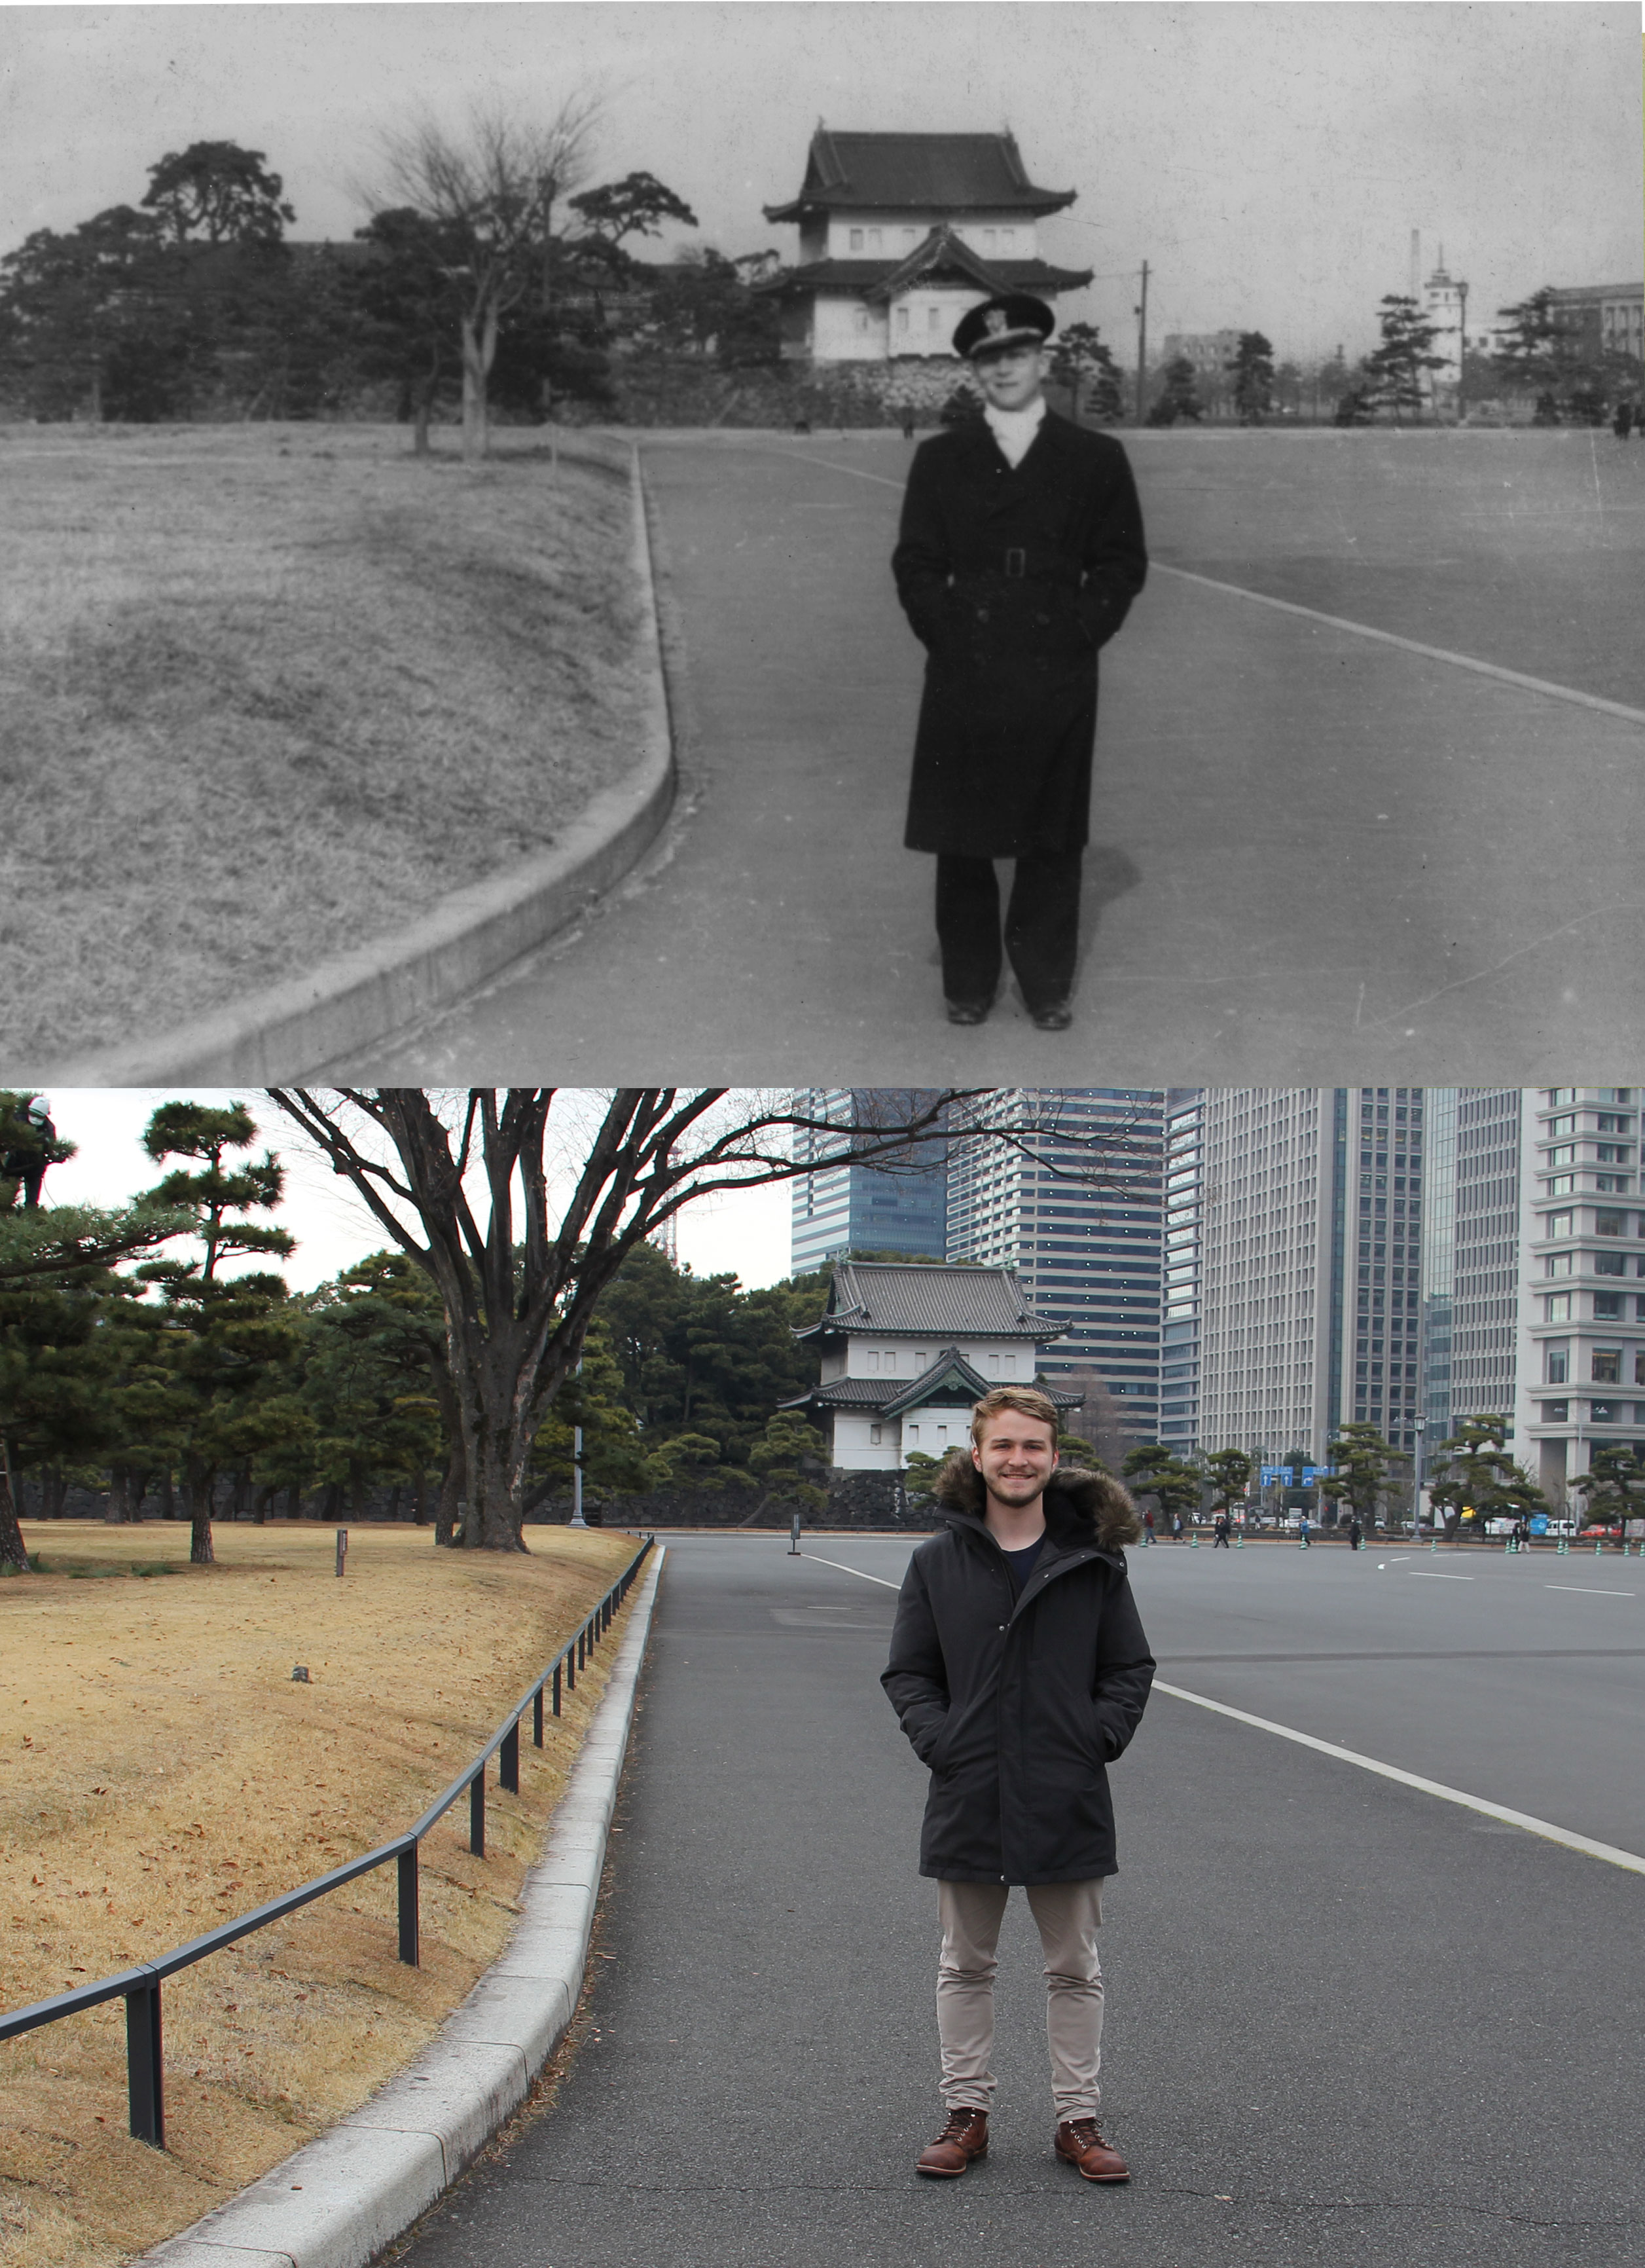 an old photo on top of a modern photo of the same location